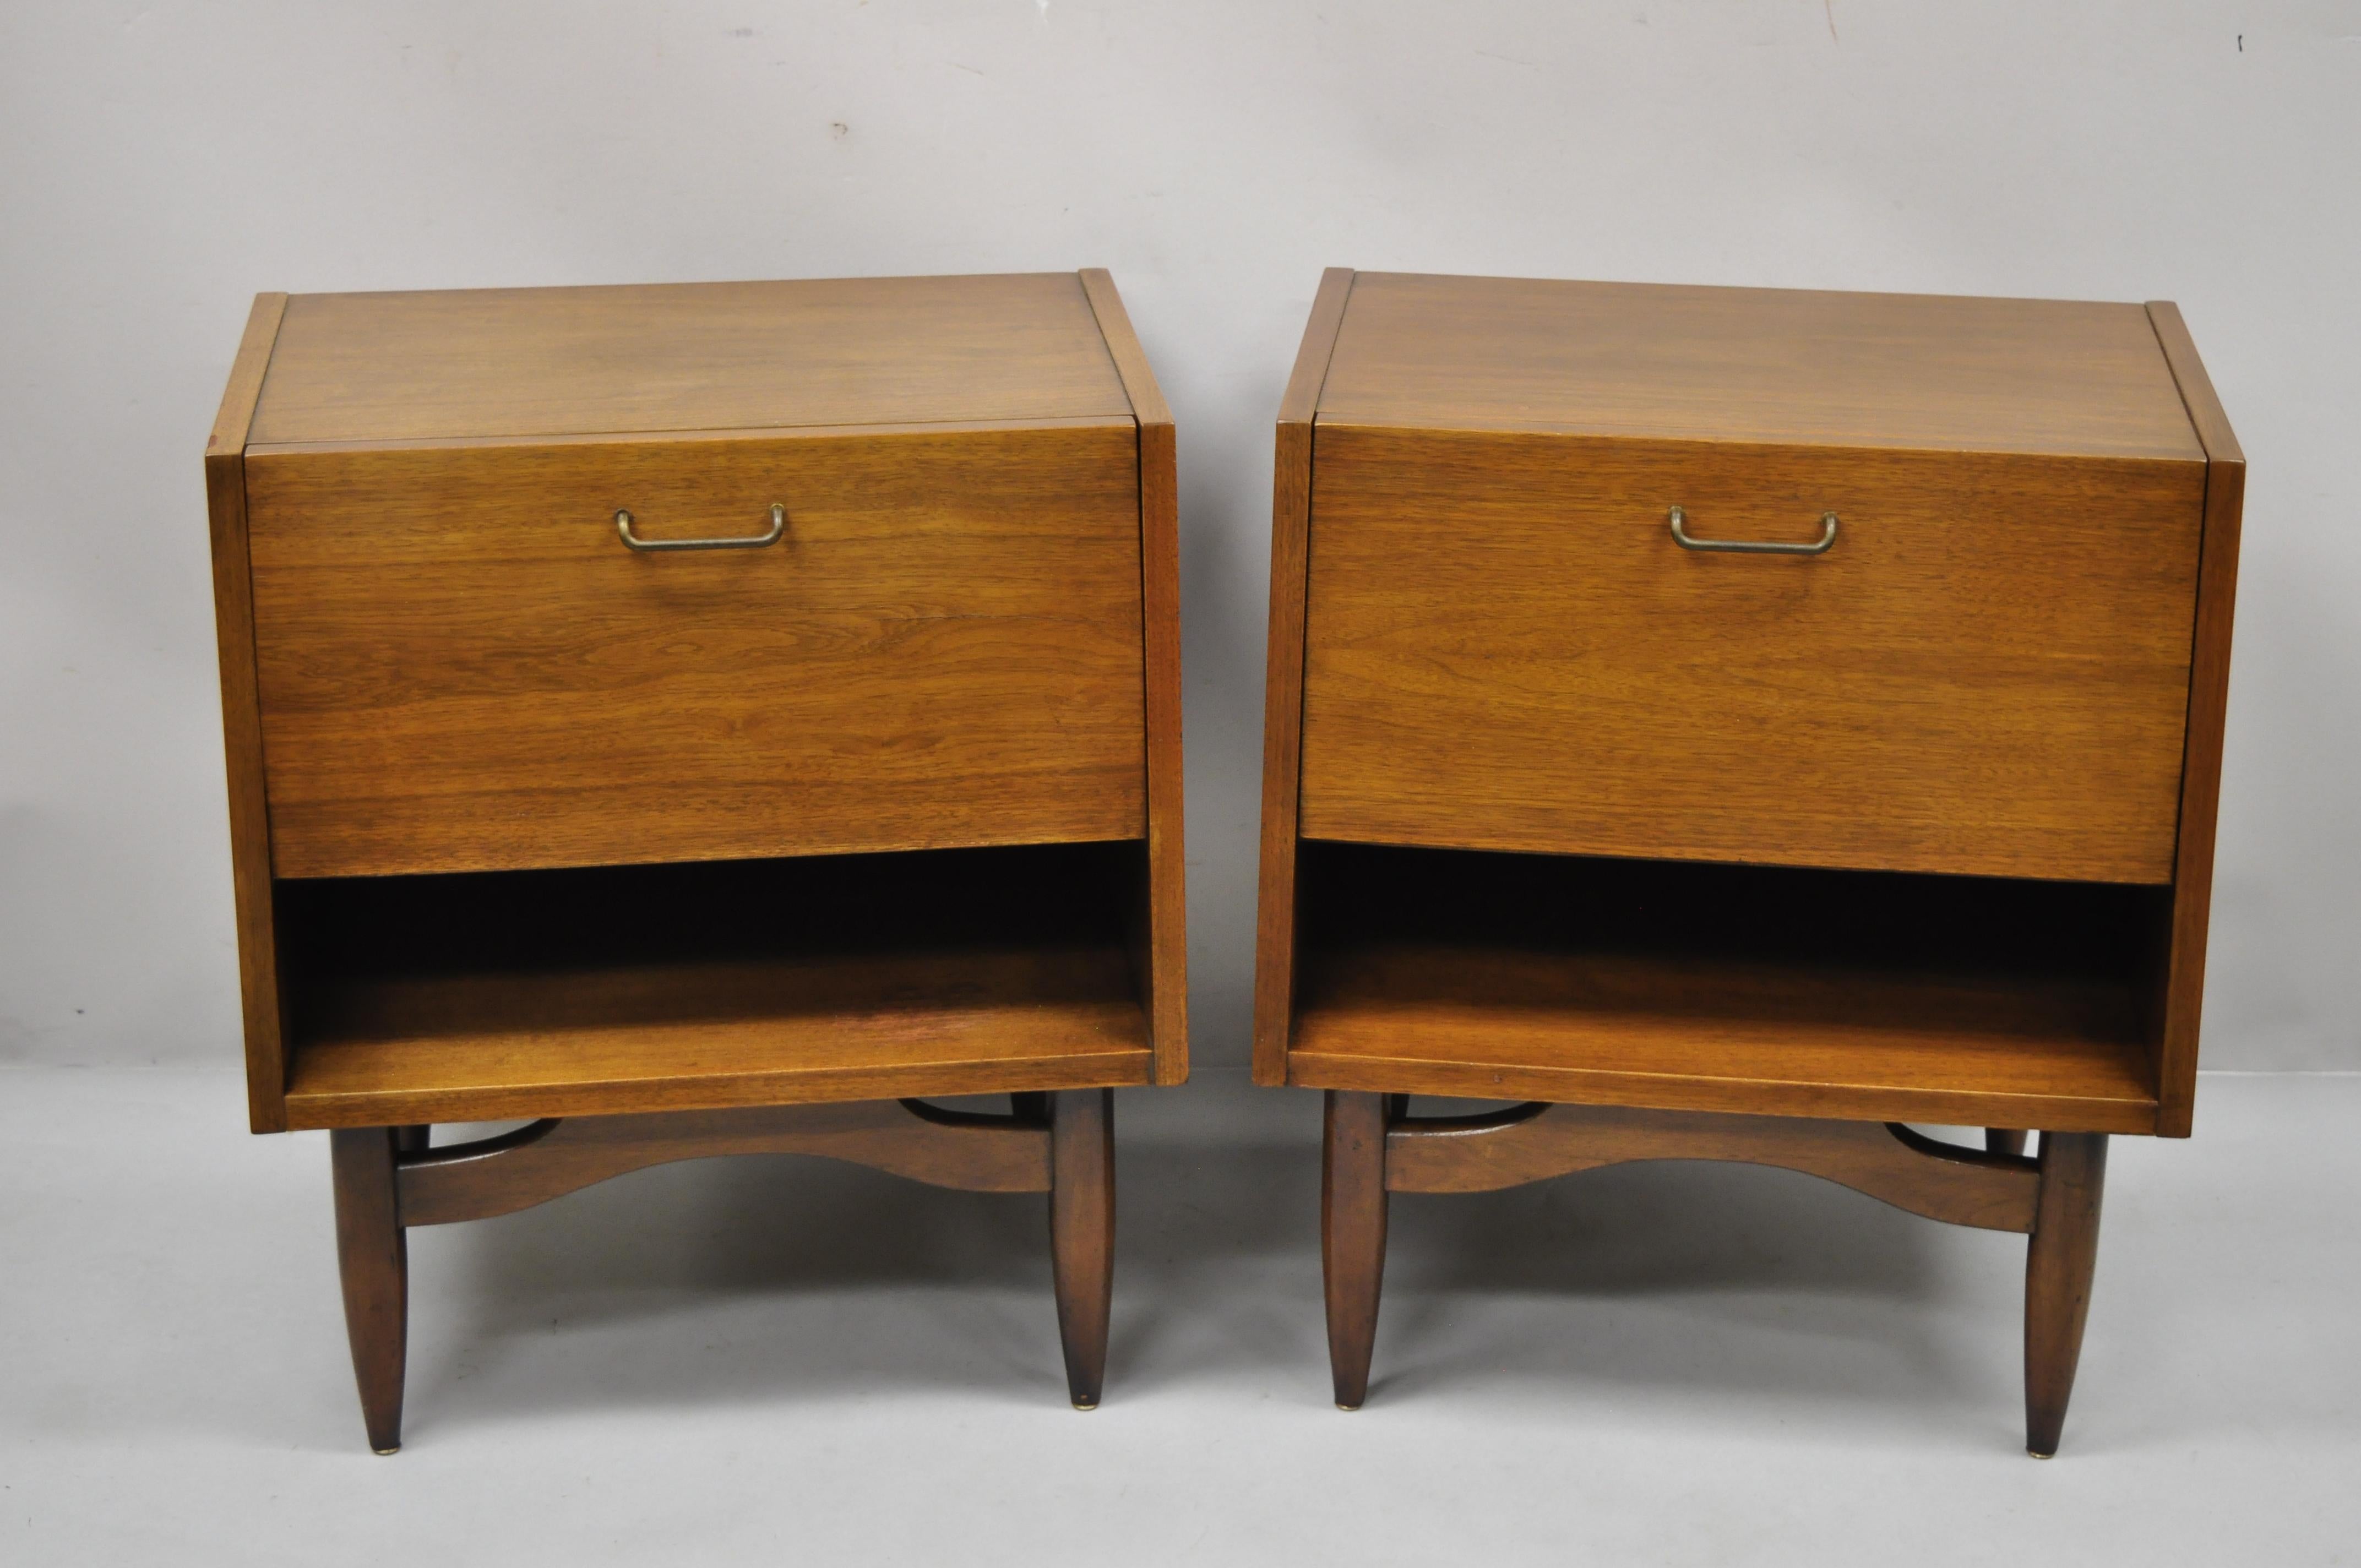 American of Martinsville Mid-Century Modern walnut nightstands bedside tables, a pair. Item features 1 fall front door, storage cubby interior, laminate surface, beautiful wood grain, original stamp, 1 dovetailed drawer, tapered legs, very nice